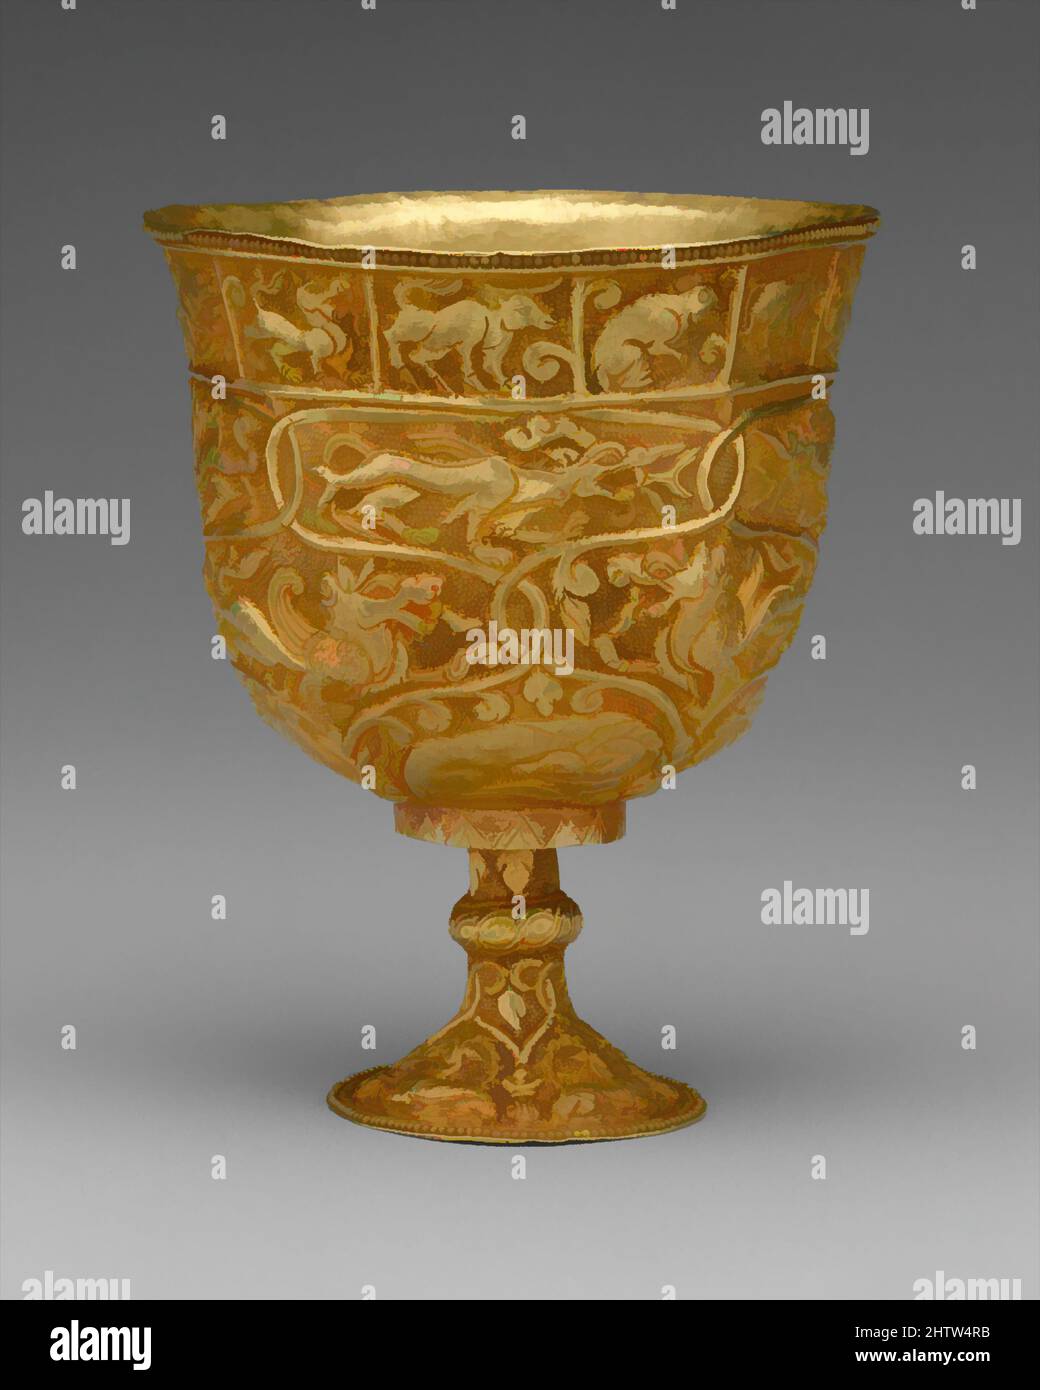 Art inspired by Stem Cup, Period of Tibetan Empire, 7th–9th century, China (Xinjiang Autonomous Region, Central Asia), Gold with repoussé decoration, H. 3 1/2 in. (8.9 cm); Diam. of mouth 2 3/4 in. (7 cm), Metalwork, The intertwined vine with its curled leaves is reminiscent of Sogdian, Classic works modernized by Artotop with a splash of modernity. Shapes, color and value, eye-catching visual impact on art. Emotions through freedom of artworks in a contemporary way. A timeless message pursuing a wildly creative new direction. Artists turning to the digital medium and creating the Artotop NFT Stock Photo